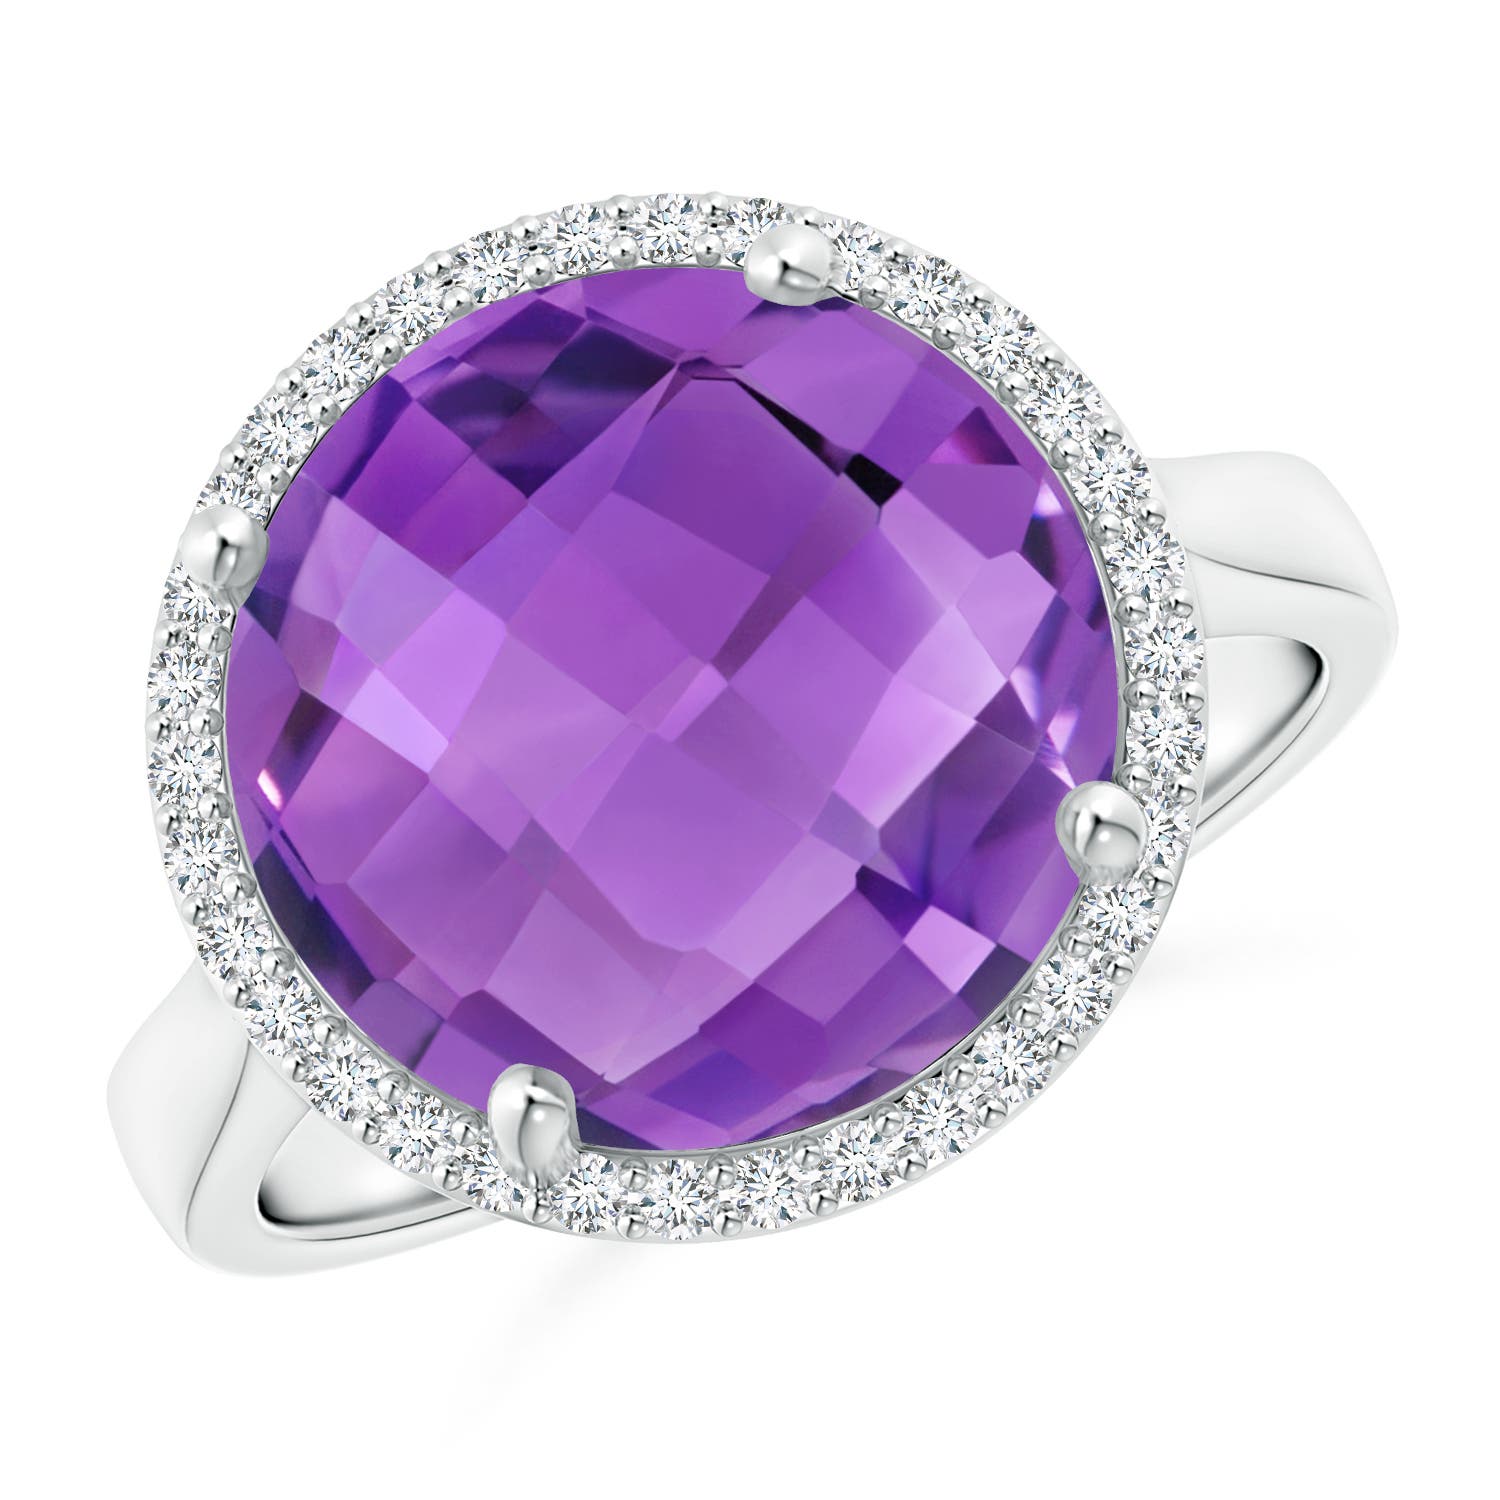 AA - Amethyst / 5.7 CT / 14 KT White Gold